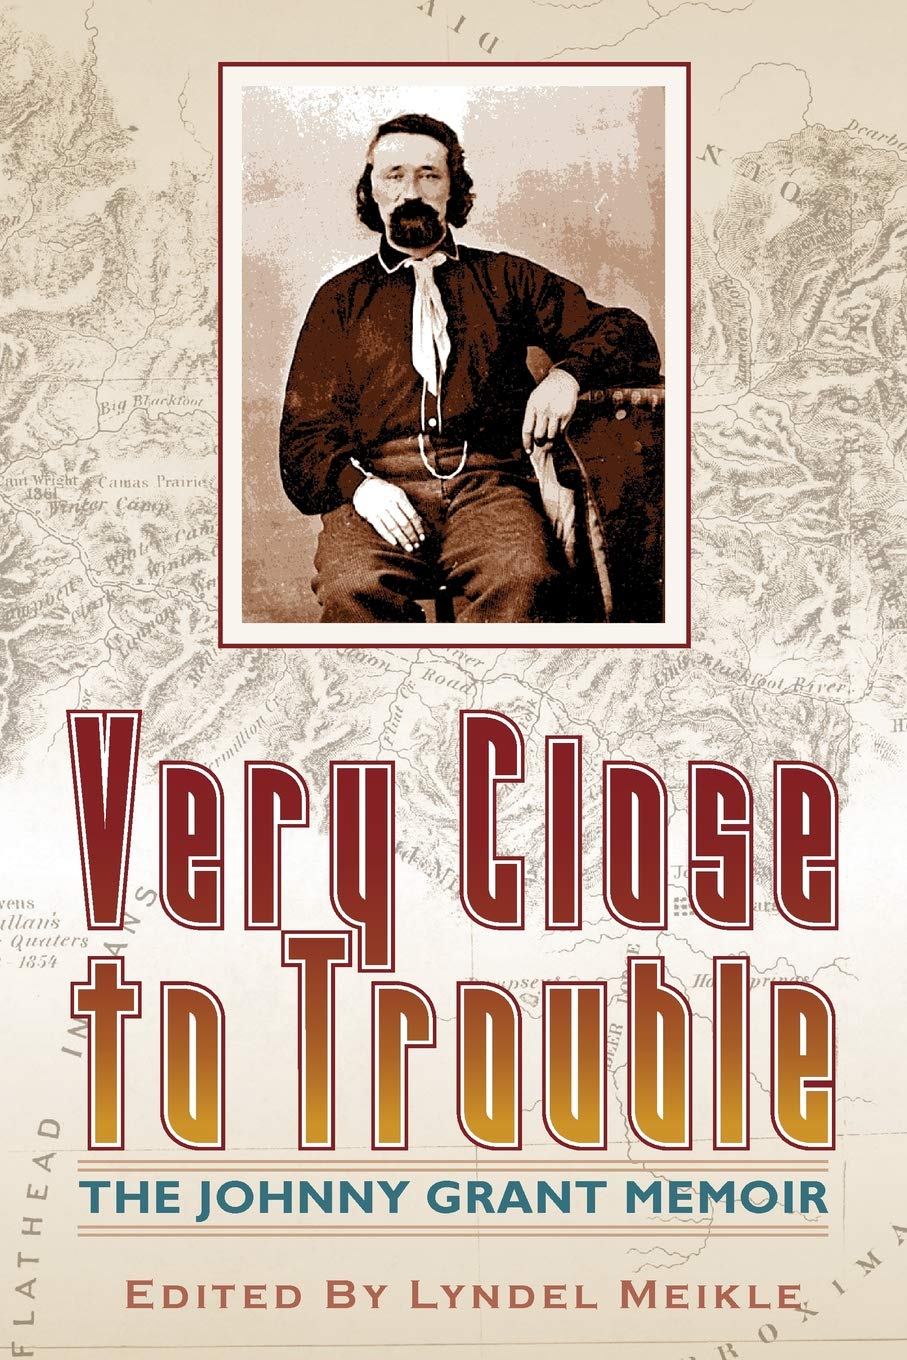 Very close to trouble: The Johnny Grant memoir (book cover)